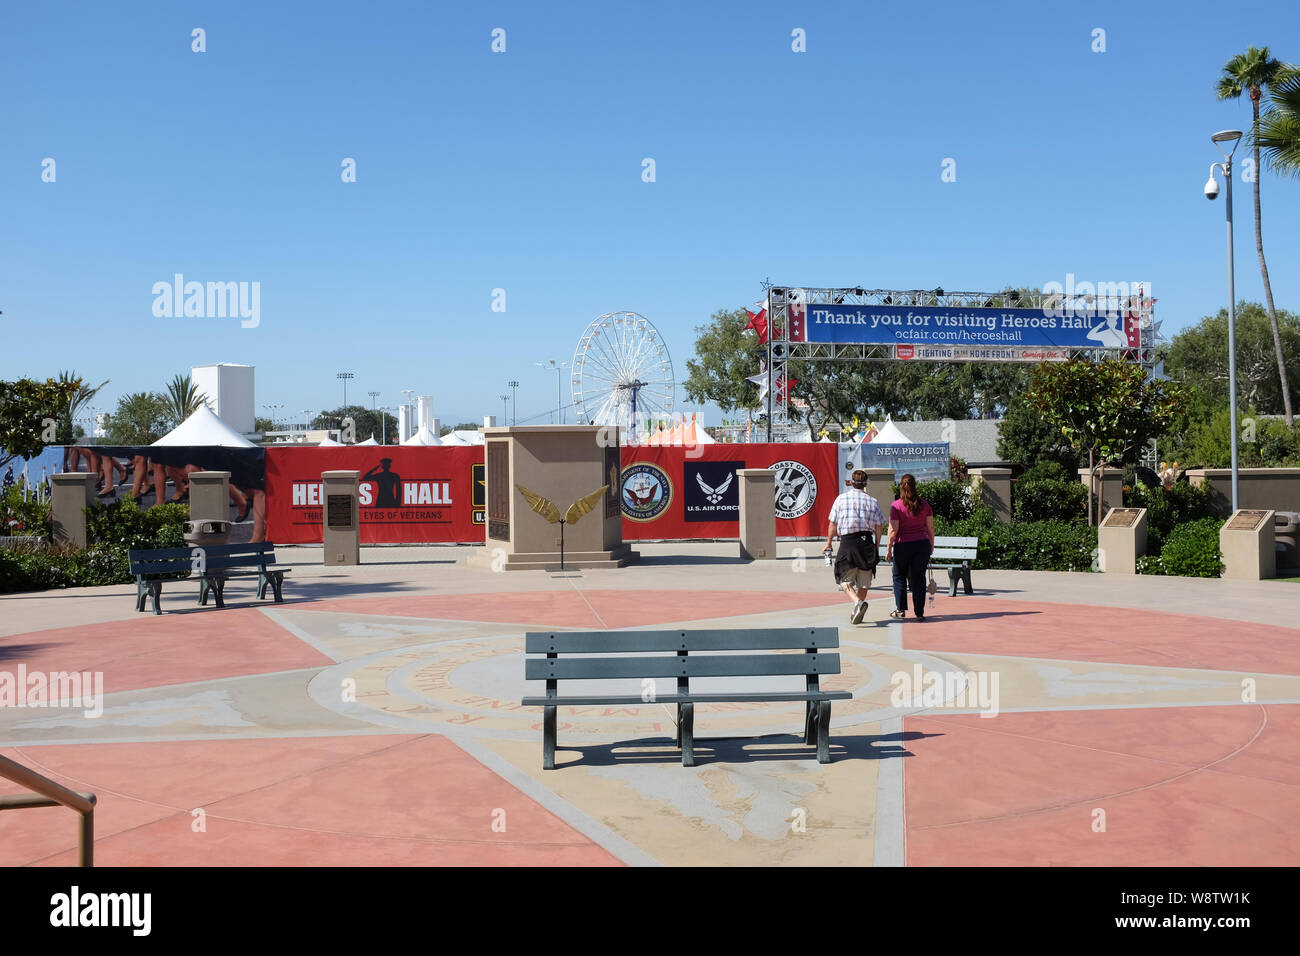 COSTA MESA, CALIFORNIA - AUG 8, 2019: Heroes Hall Courtyard at the OC Fair and Event Center. A museum and education center that celebrates the legacy Stock Photo